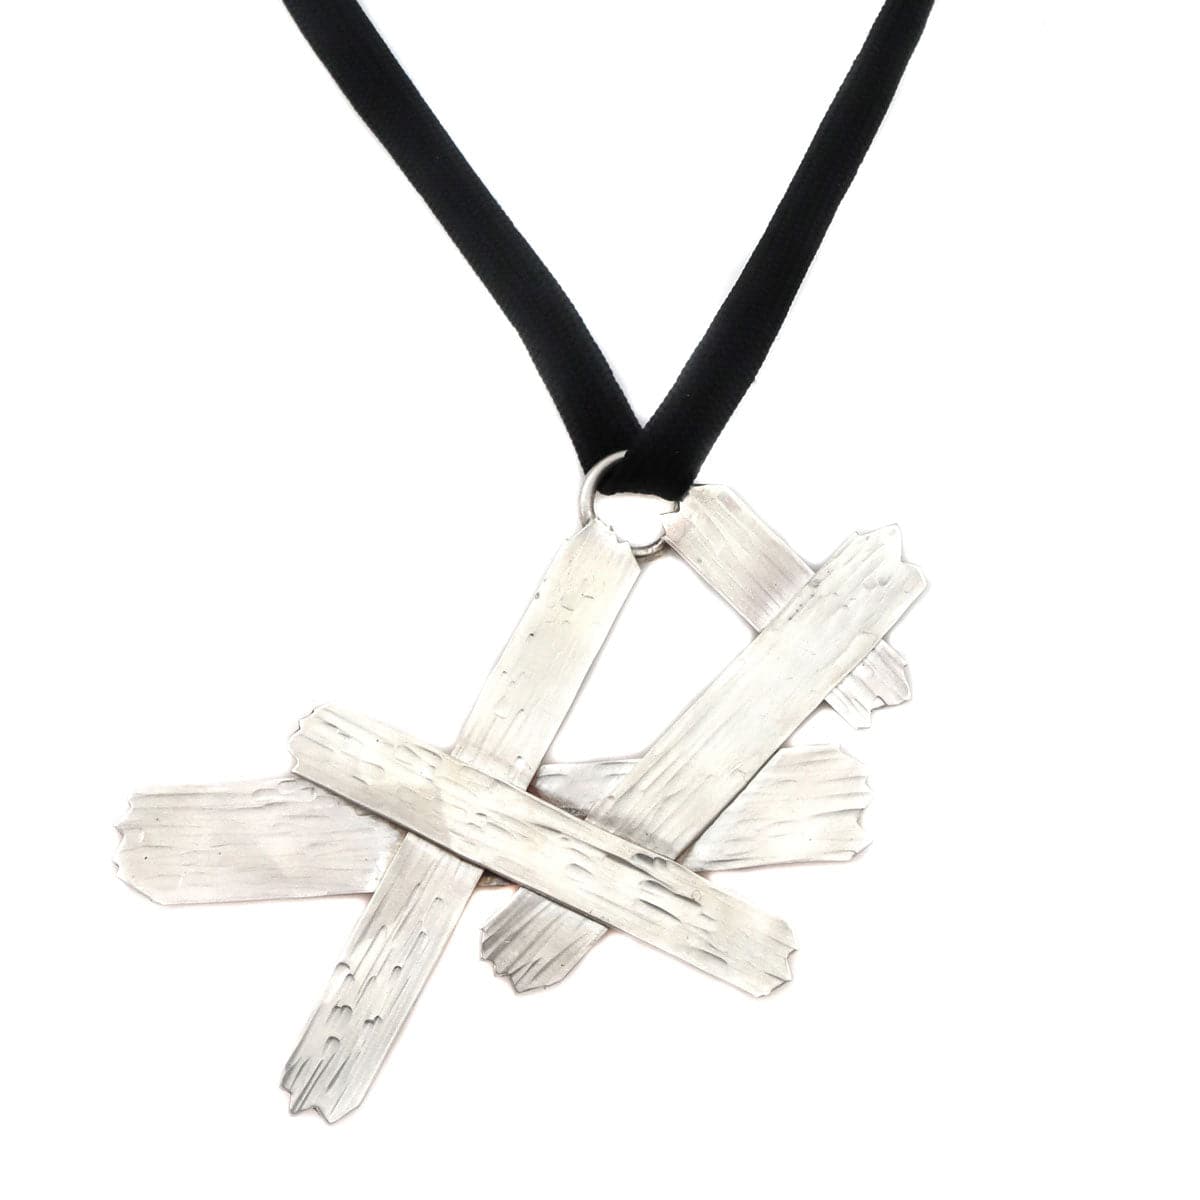 Miramontes - Necklace with Silver Abstract Pectoral Pendant #1, 25" Adjustable Length (J91305-1221-025)1